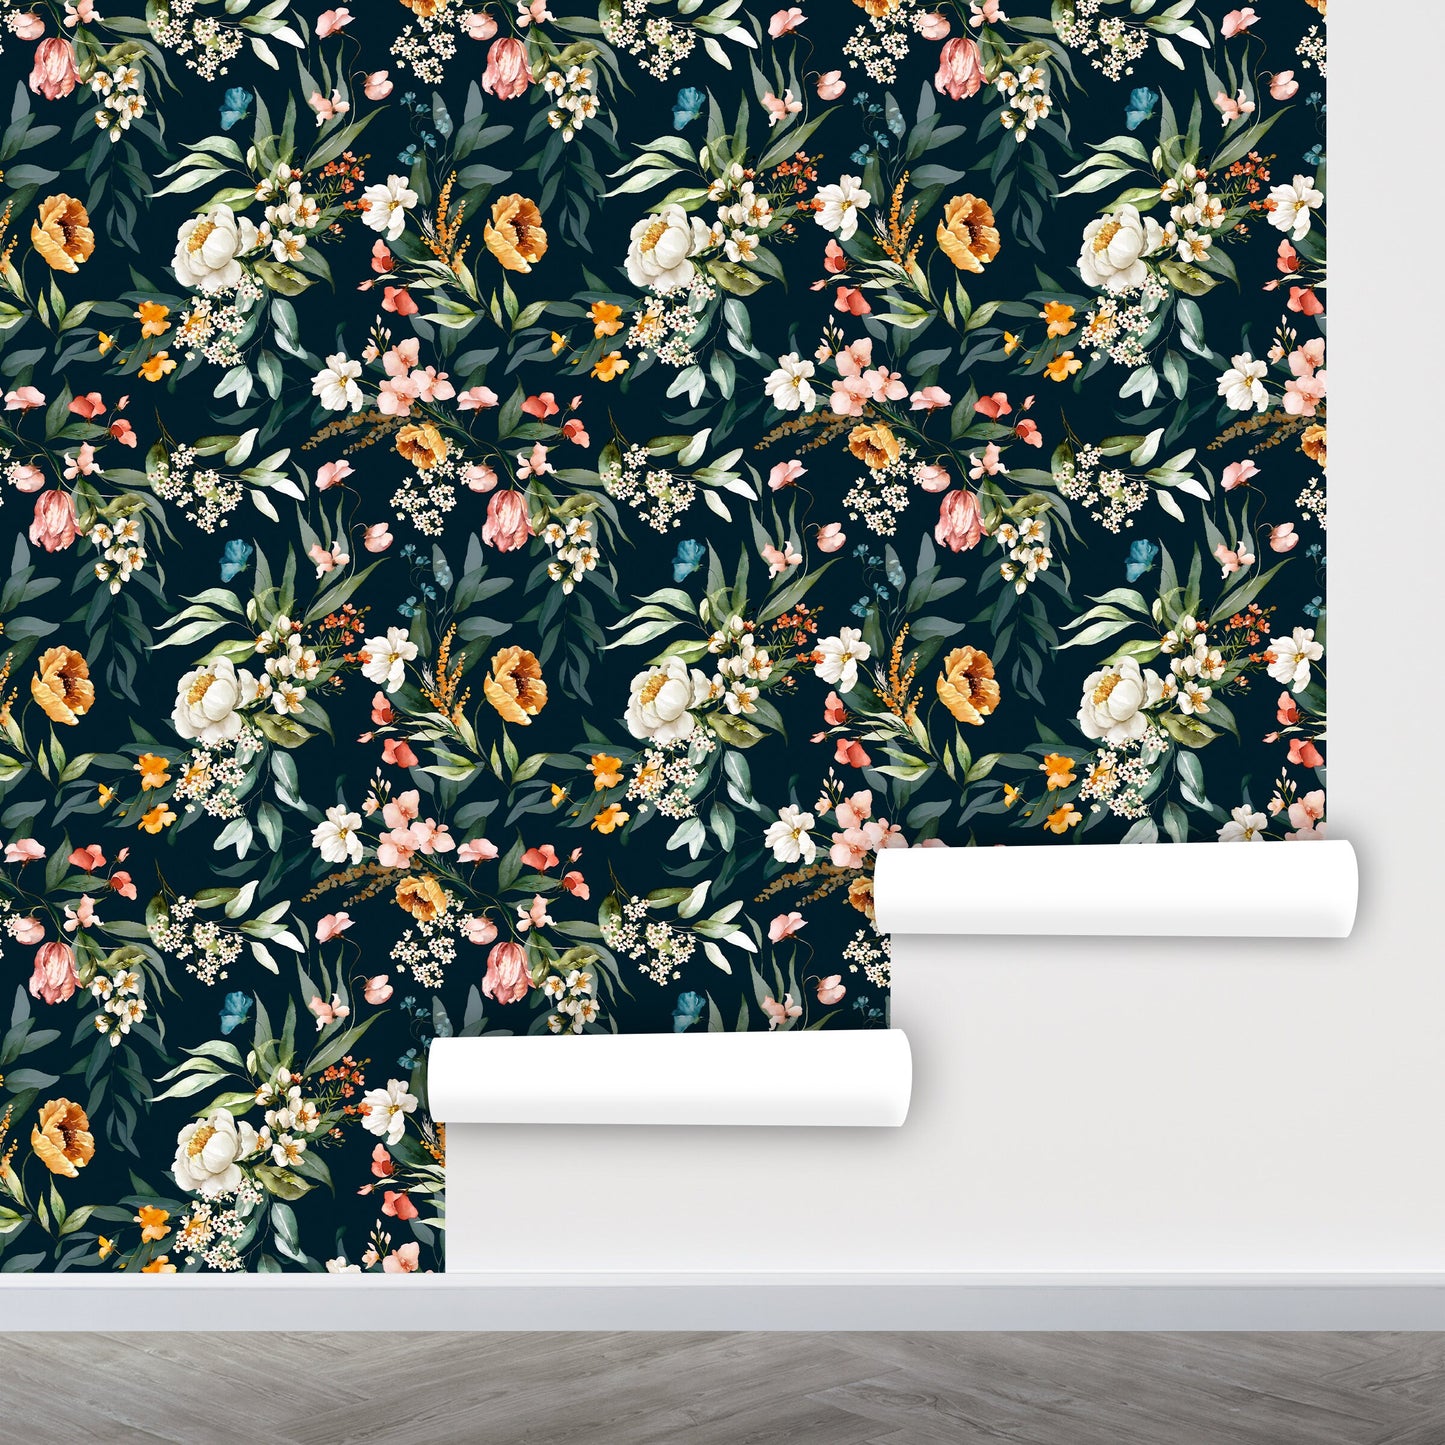 Moody Wallpaper Peel and Stick, Dark Floral Wallpaper, Removable Wall Paper